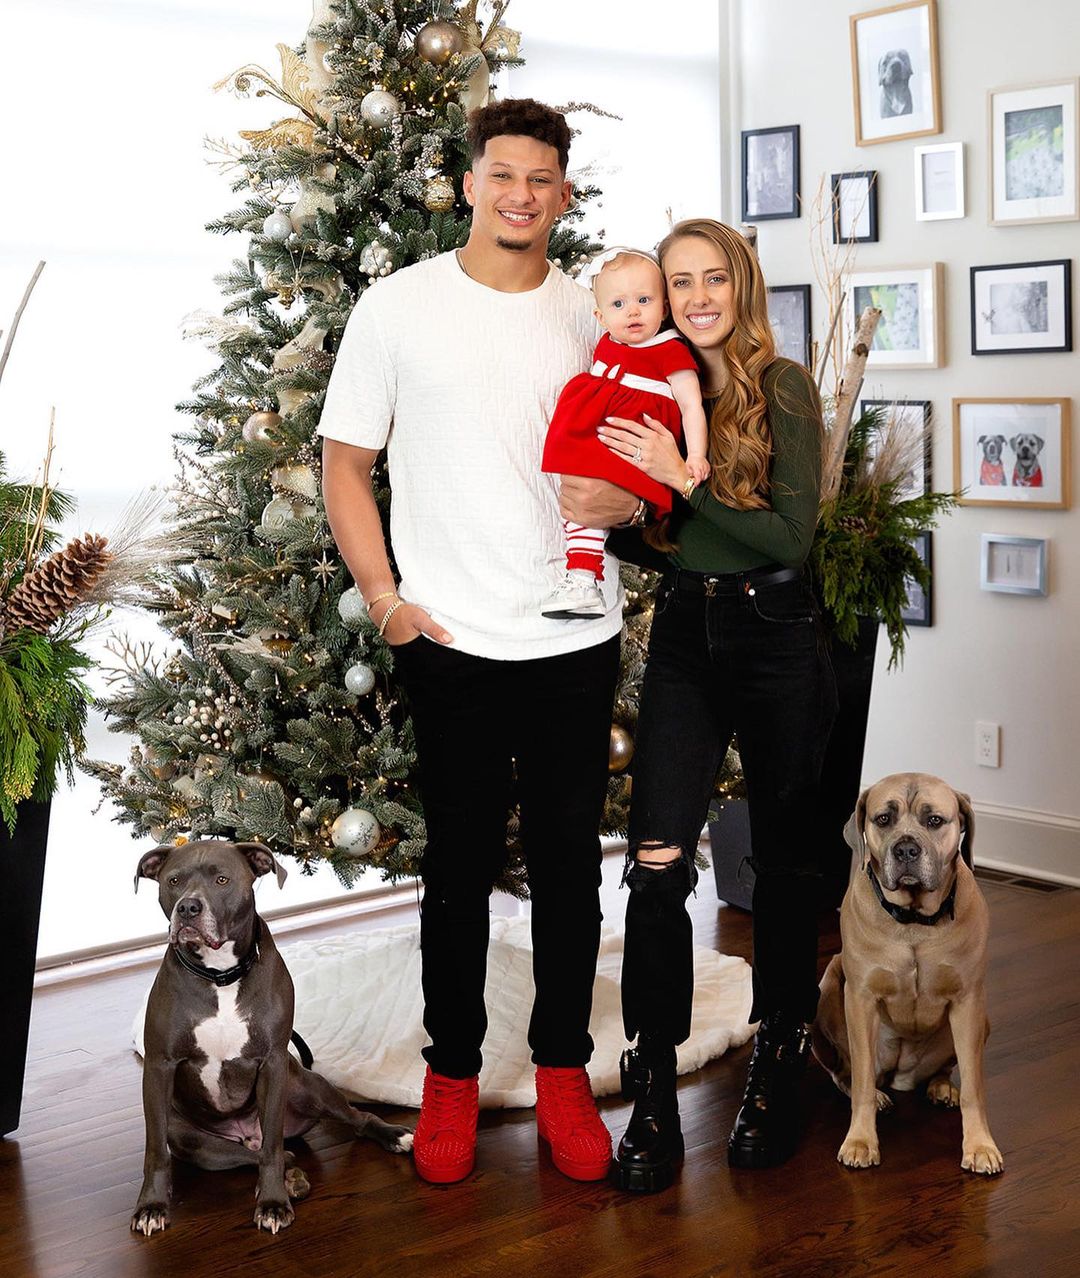 A Look At Patrick Mahomes' Net Worth, Salary, Luxury Assets And More